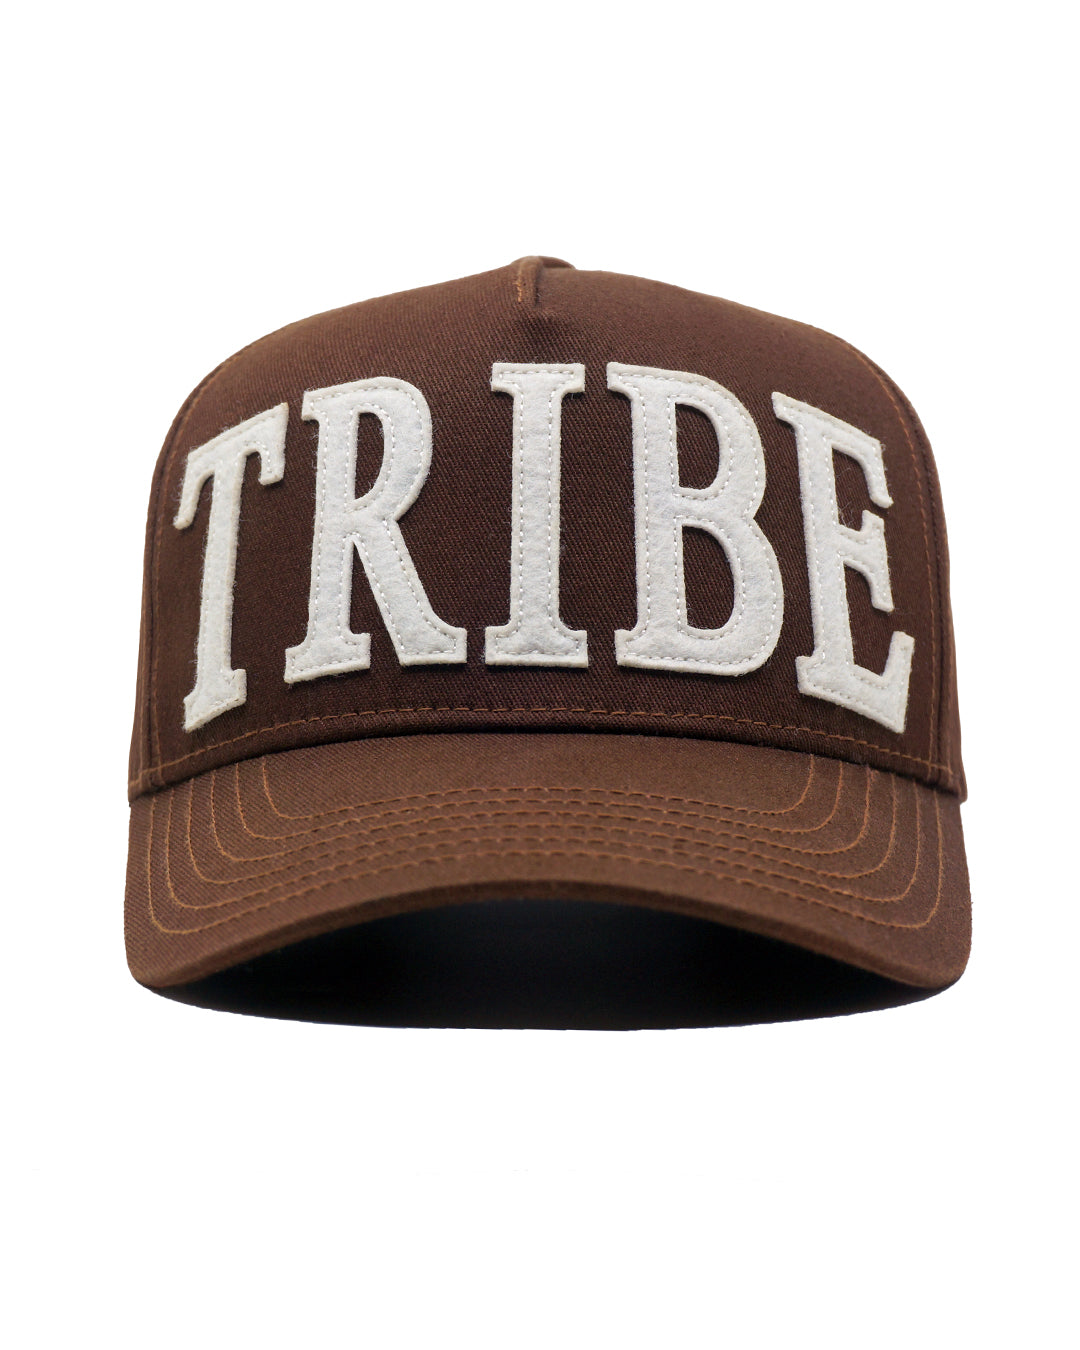 Triibe HAT OS "TRIBE" hat — Coco [PRE-ORDER]